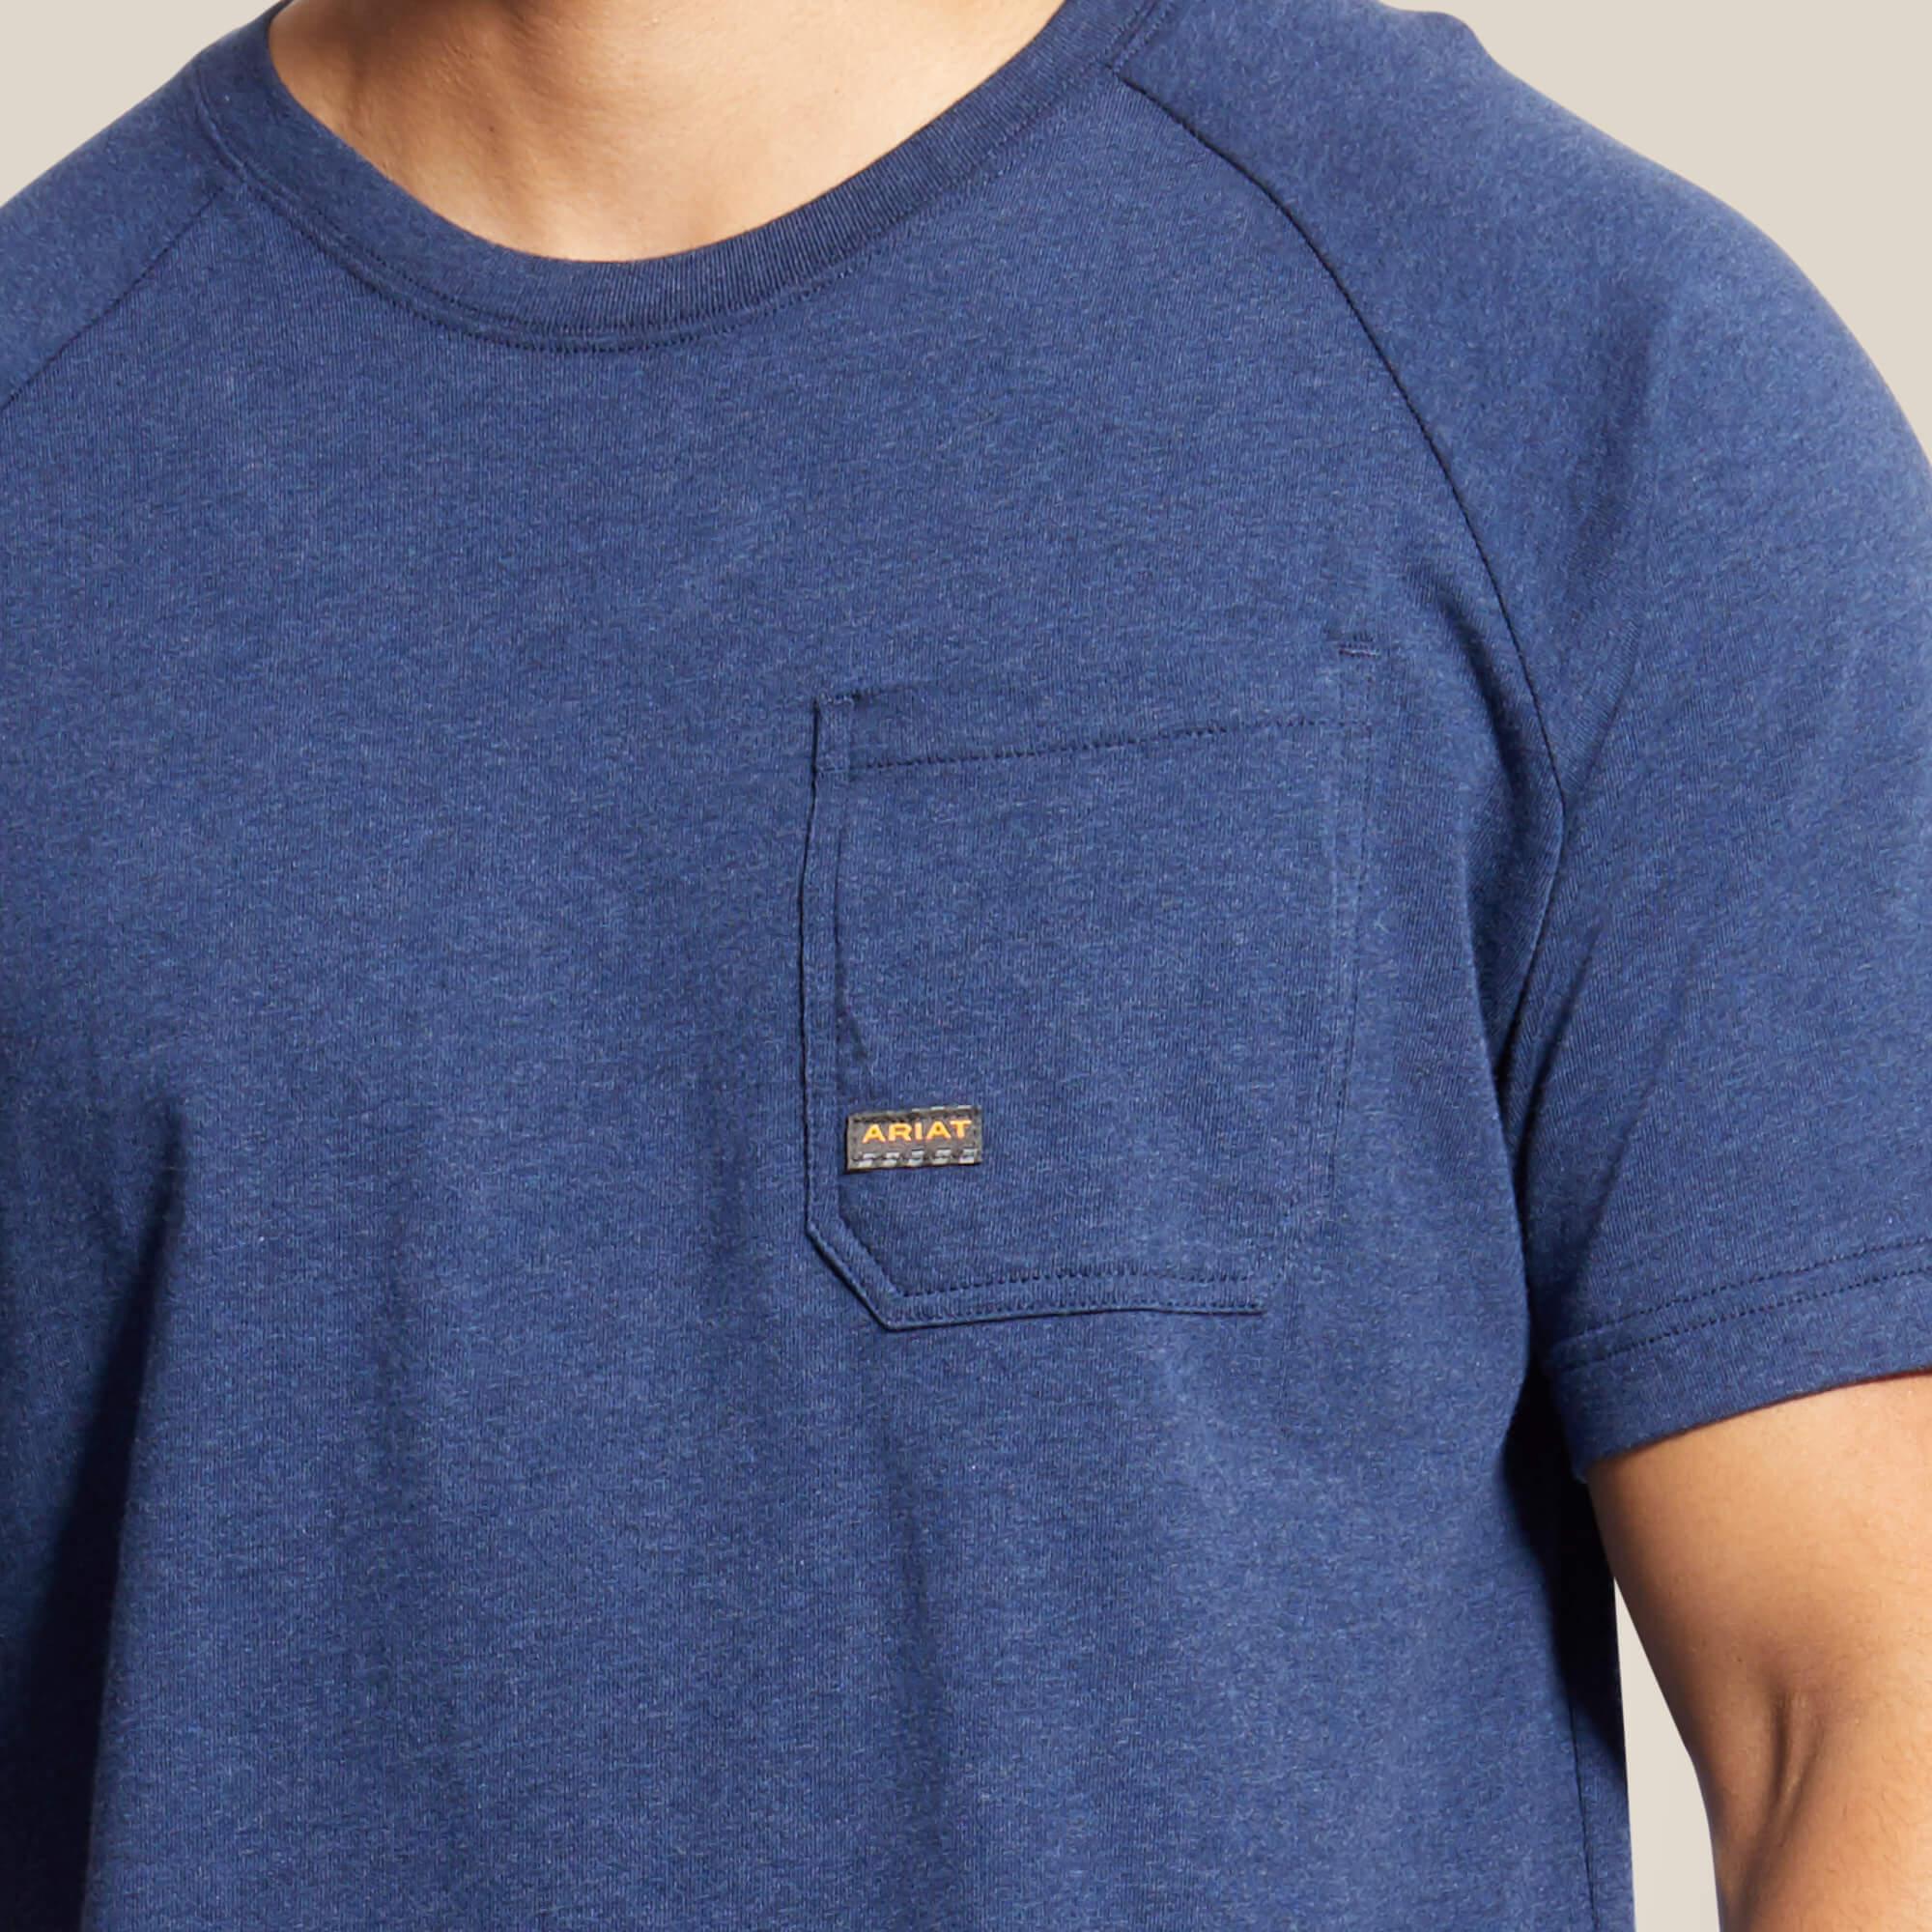 Rebar Cotton Strong T-Shirt - Navy Heather - Purpose-Built / Home of the Trades